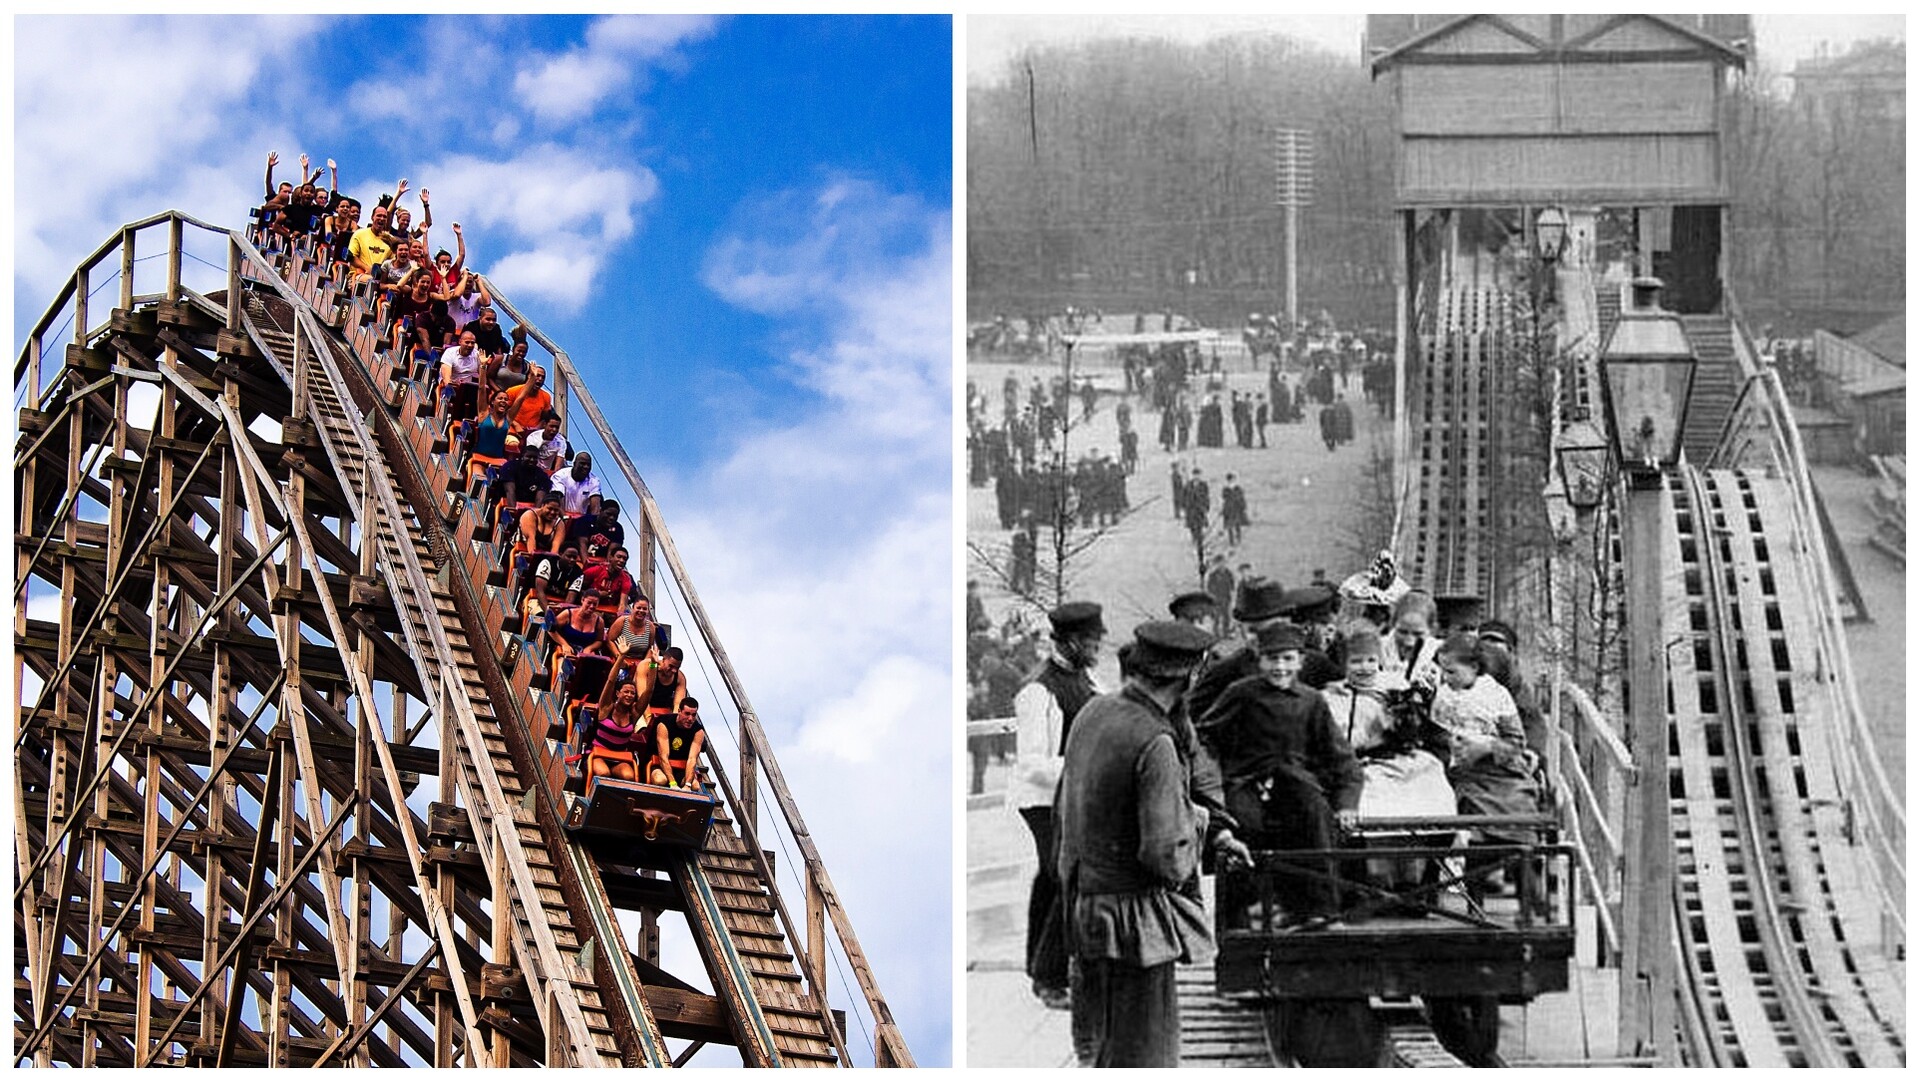 El Toro wooden roller coaster at Great Adventure Park in New Jersey, U.S. (L); “American” mountains in St. Petersburg, Russia, late 19th century